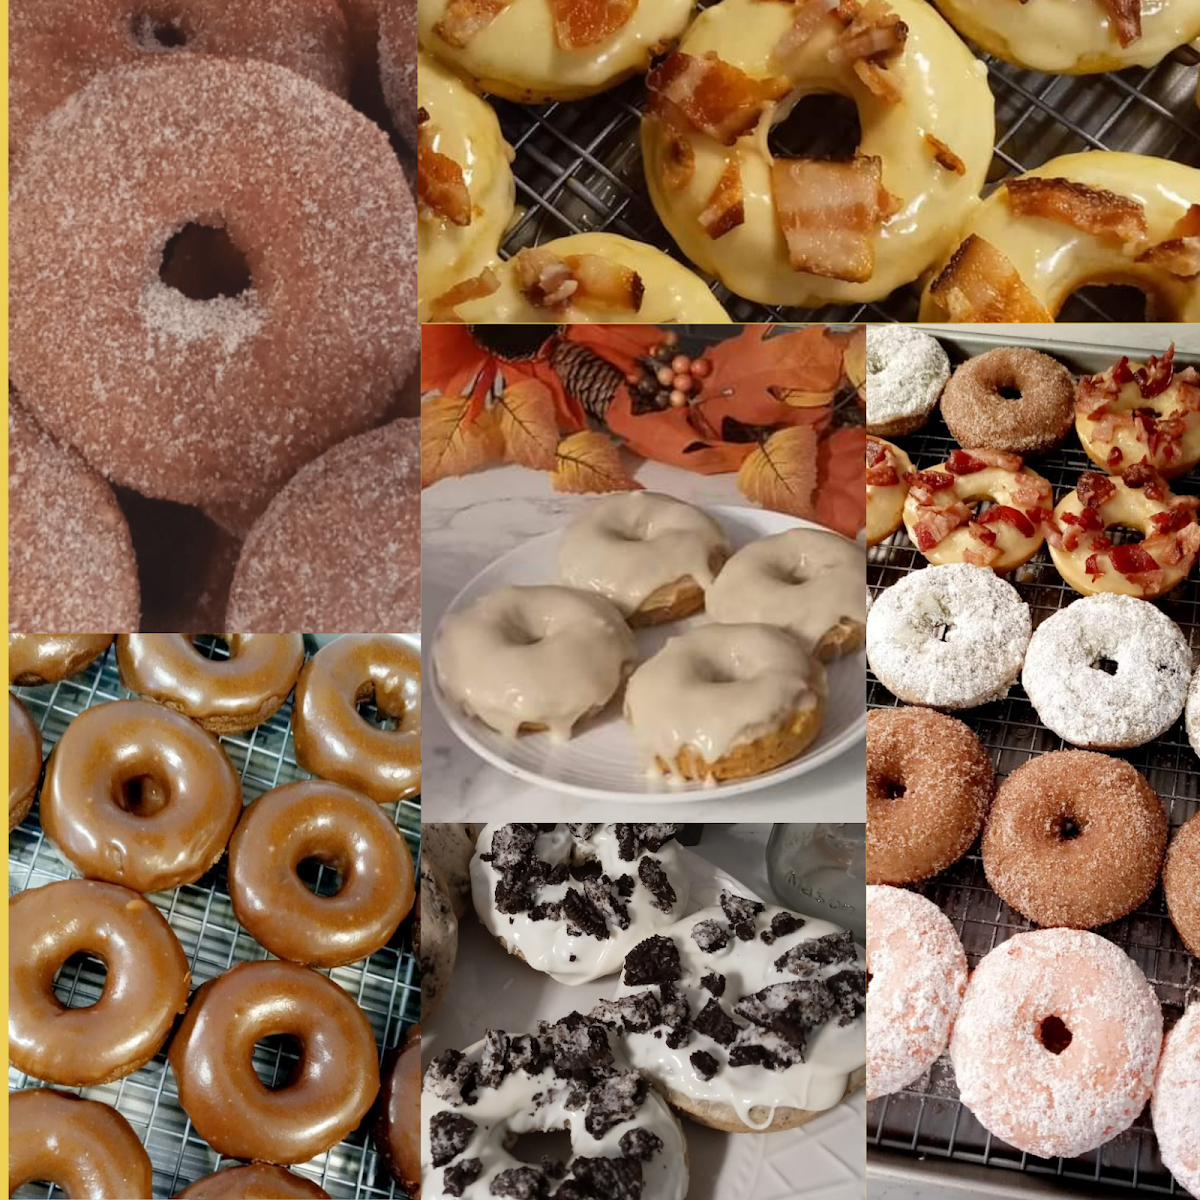 A few donuts options. These are the gourmet donuts favorite donut